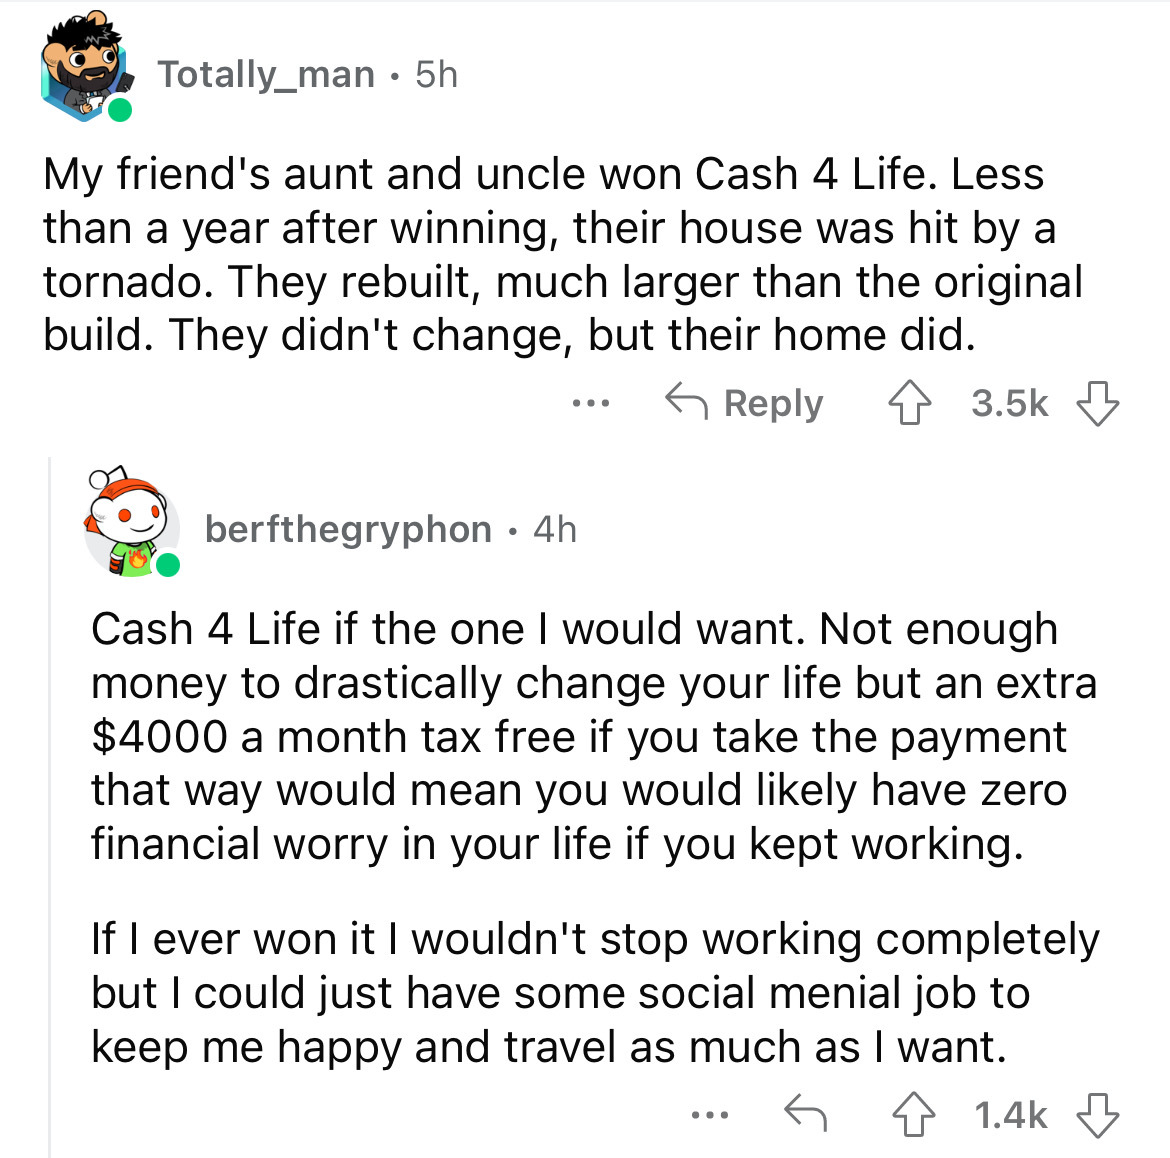 angle - Totally_man. 5h My friend's aunt and uncle won Cash 4 Life. Less than a year after winning, their house was hit by a tornado. They rebuilt, much larger than the original build. They didn't change, but their home did. 4 berfthegryphon 4h Cash 4 Lif